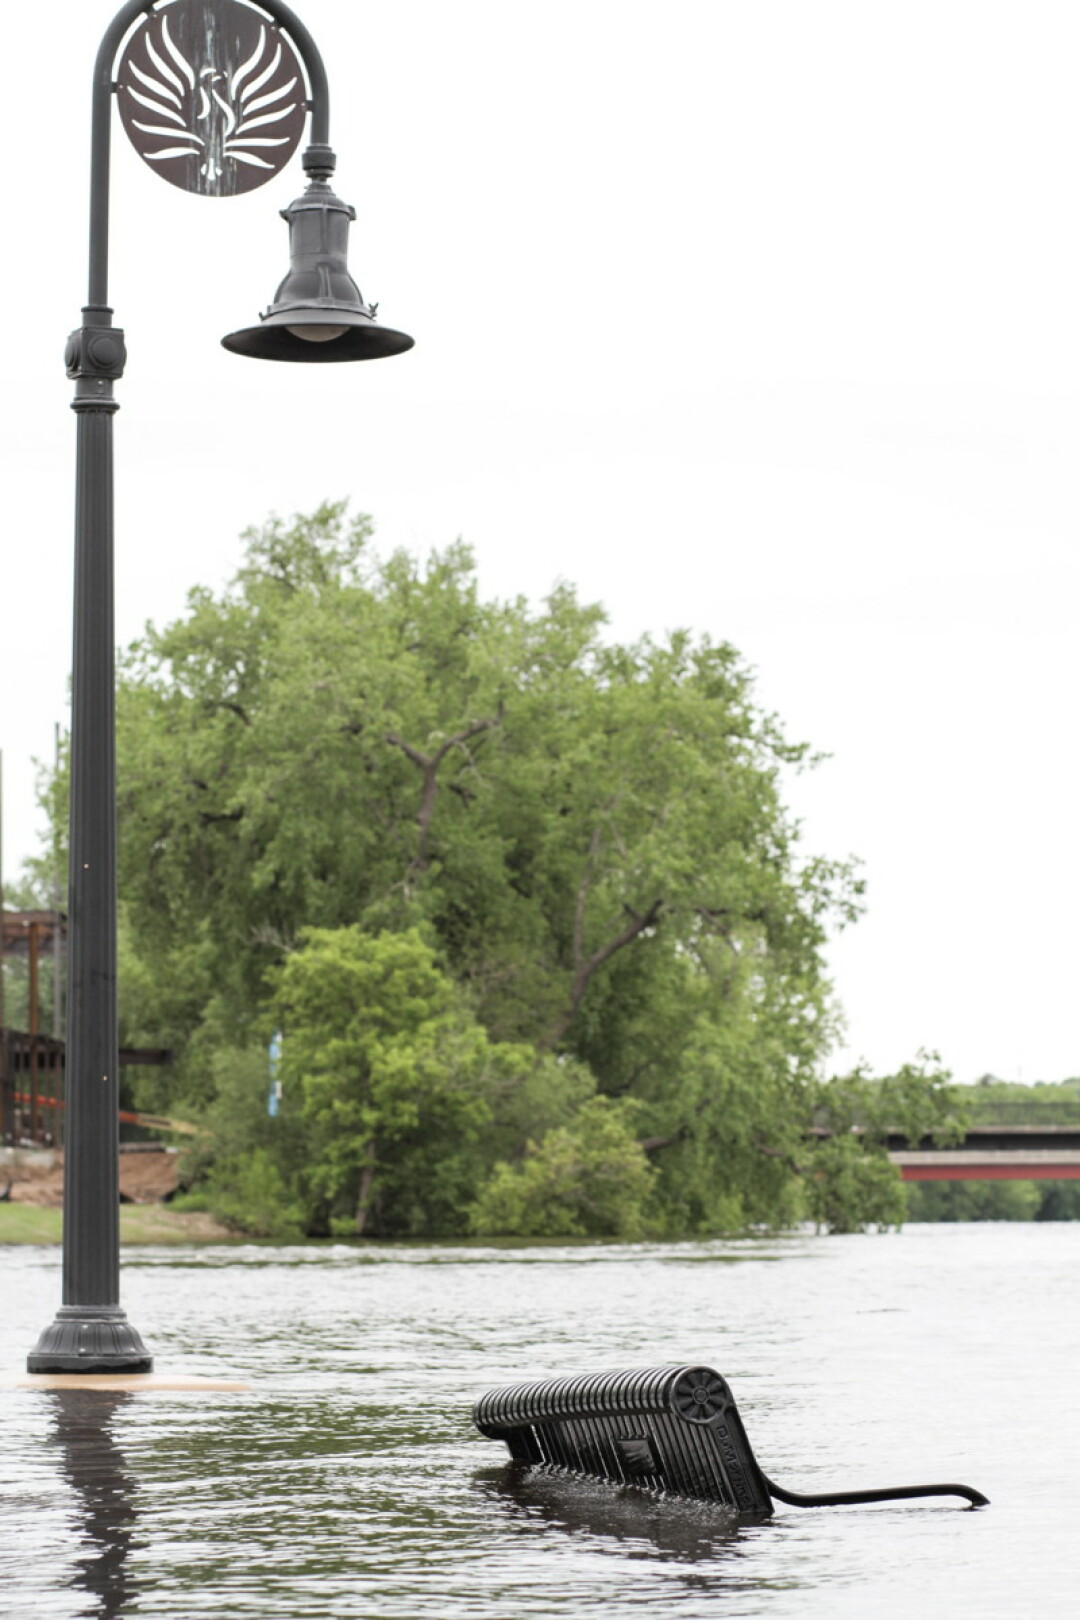 A GREAT SPOT TO TAKE IN THE RIVER. Along with many areas around the Chippewa Valley, Phoenix Park in downtown Eau Claire saw considerable flooding in mid-May as the Chippewa and Eau Claire Rivers swelled.